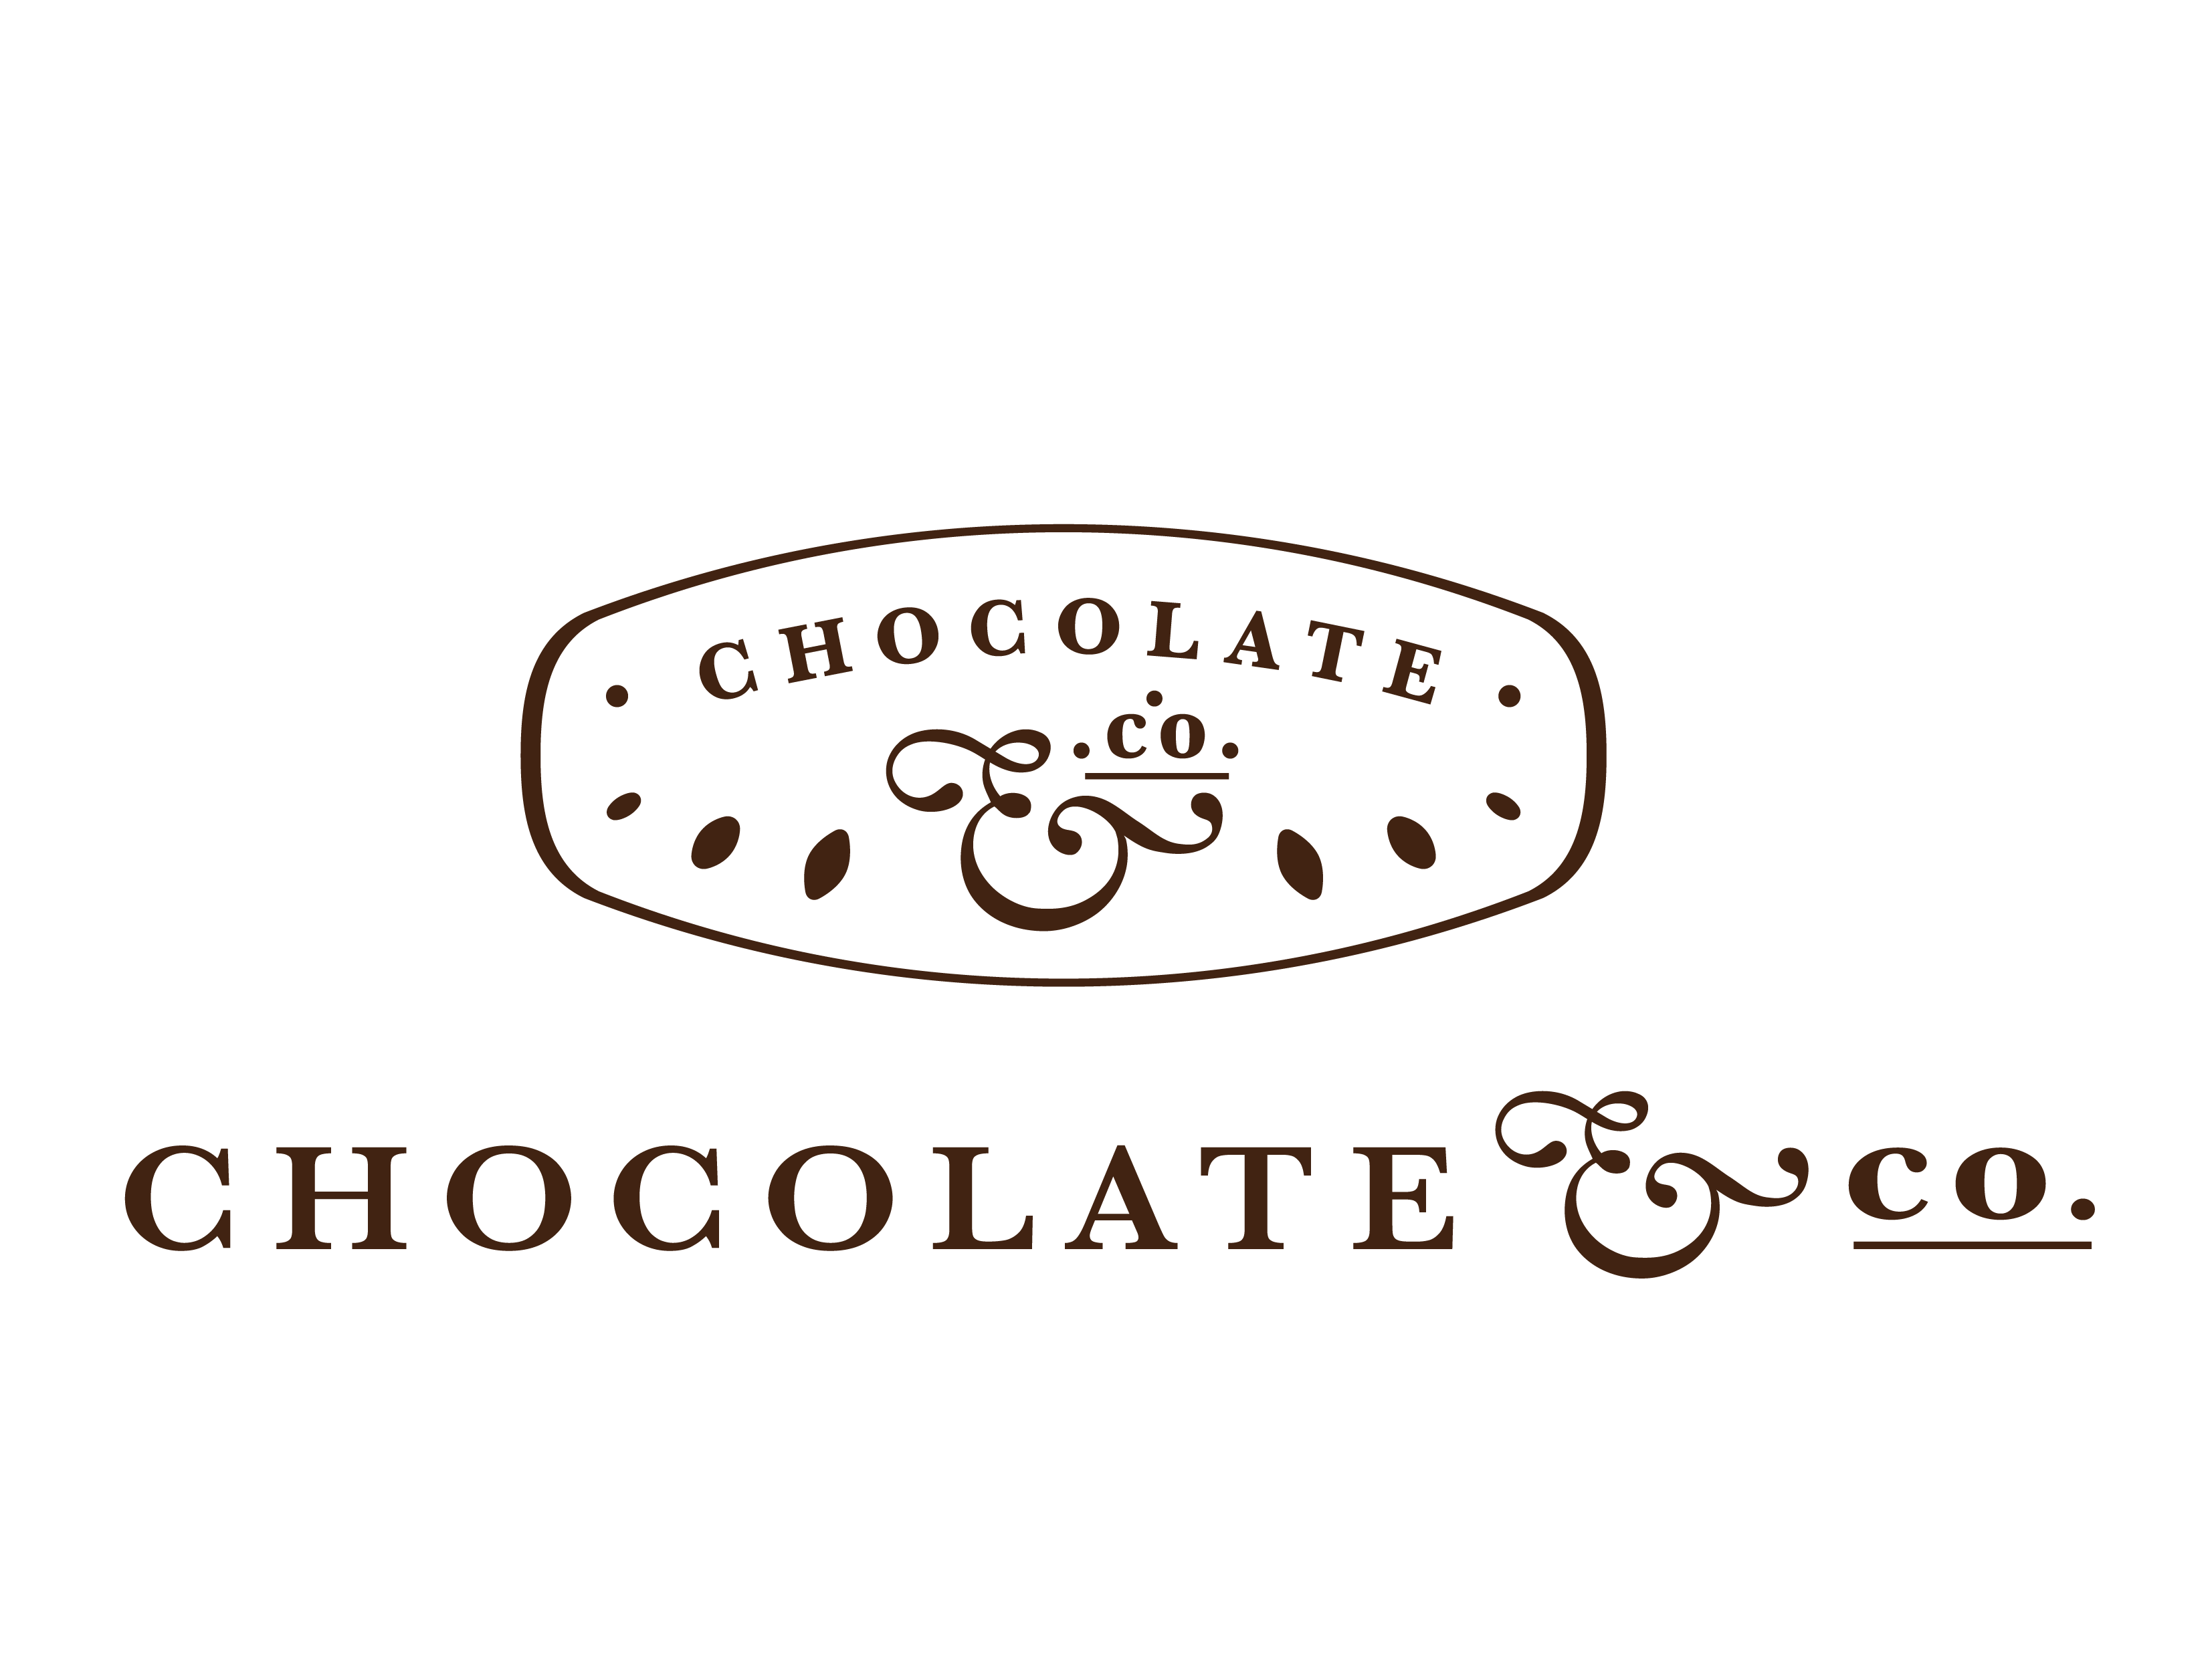 Chocolate and Co Company W.L.L